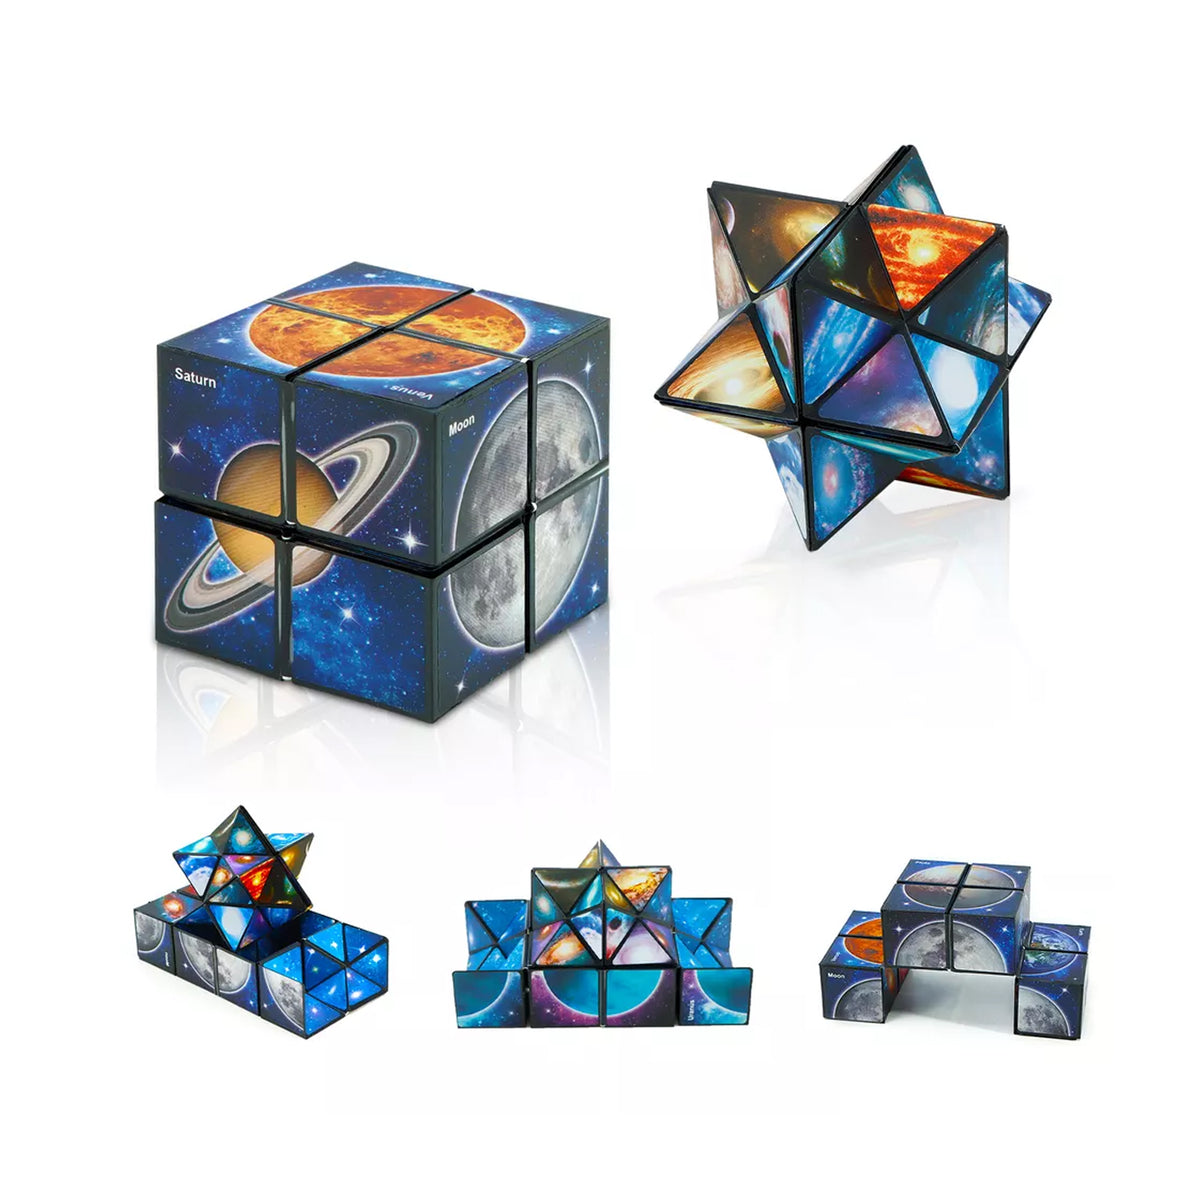 Puzzle Space Cube Fidget Toy - A Fun and Relaxing Way to Relieve Stress and Anxiety